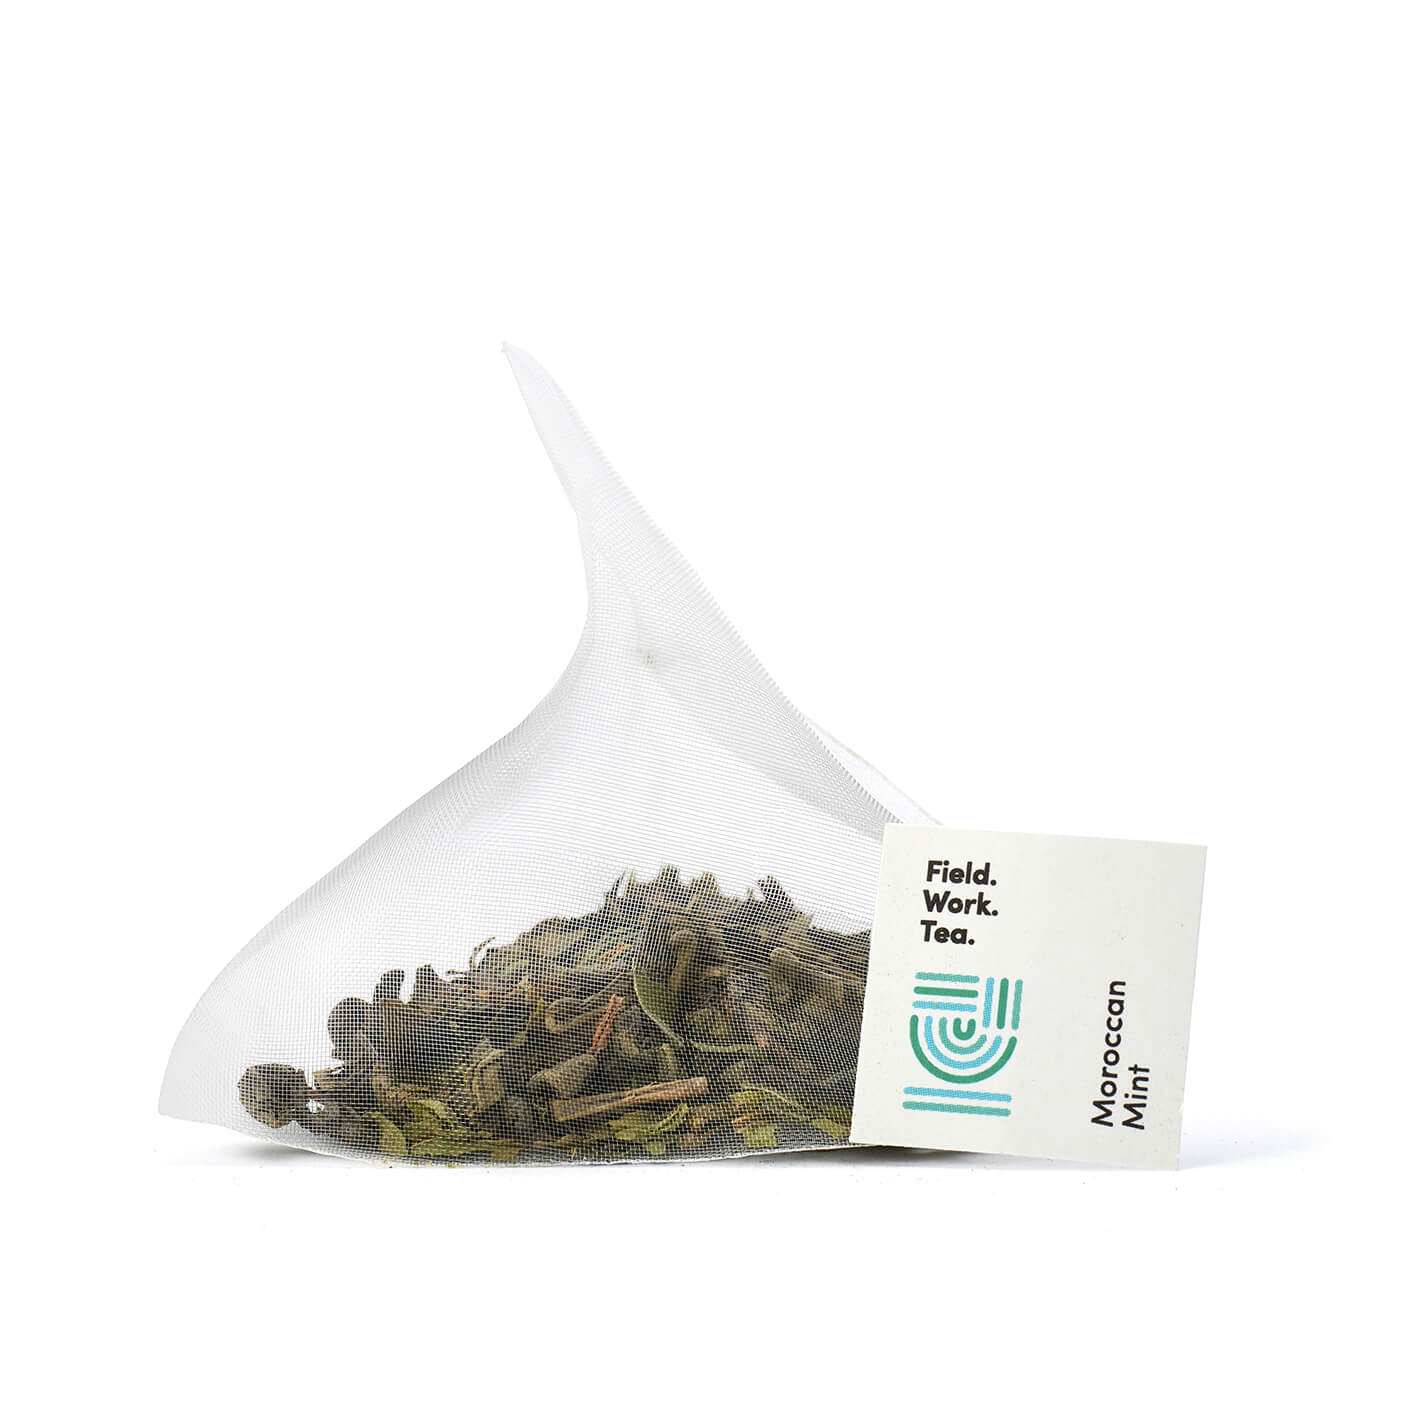 Moroccan Mint Teabags